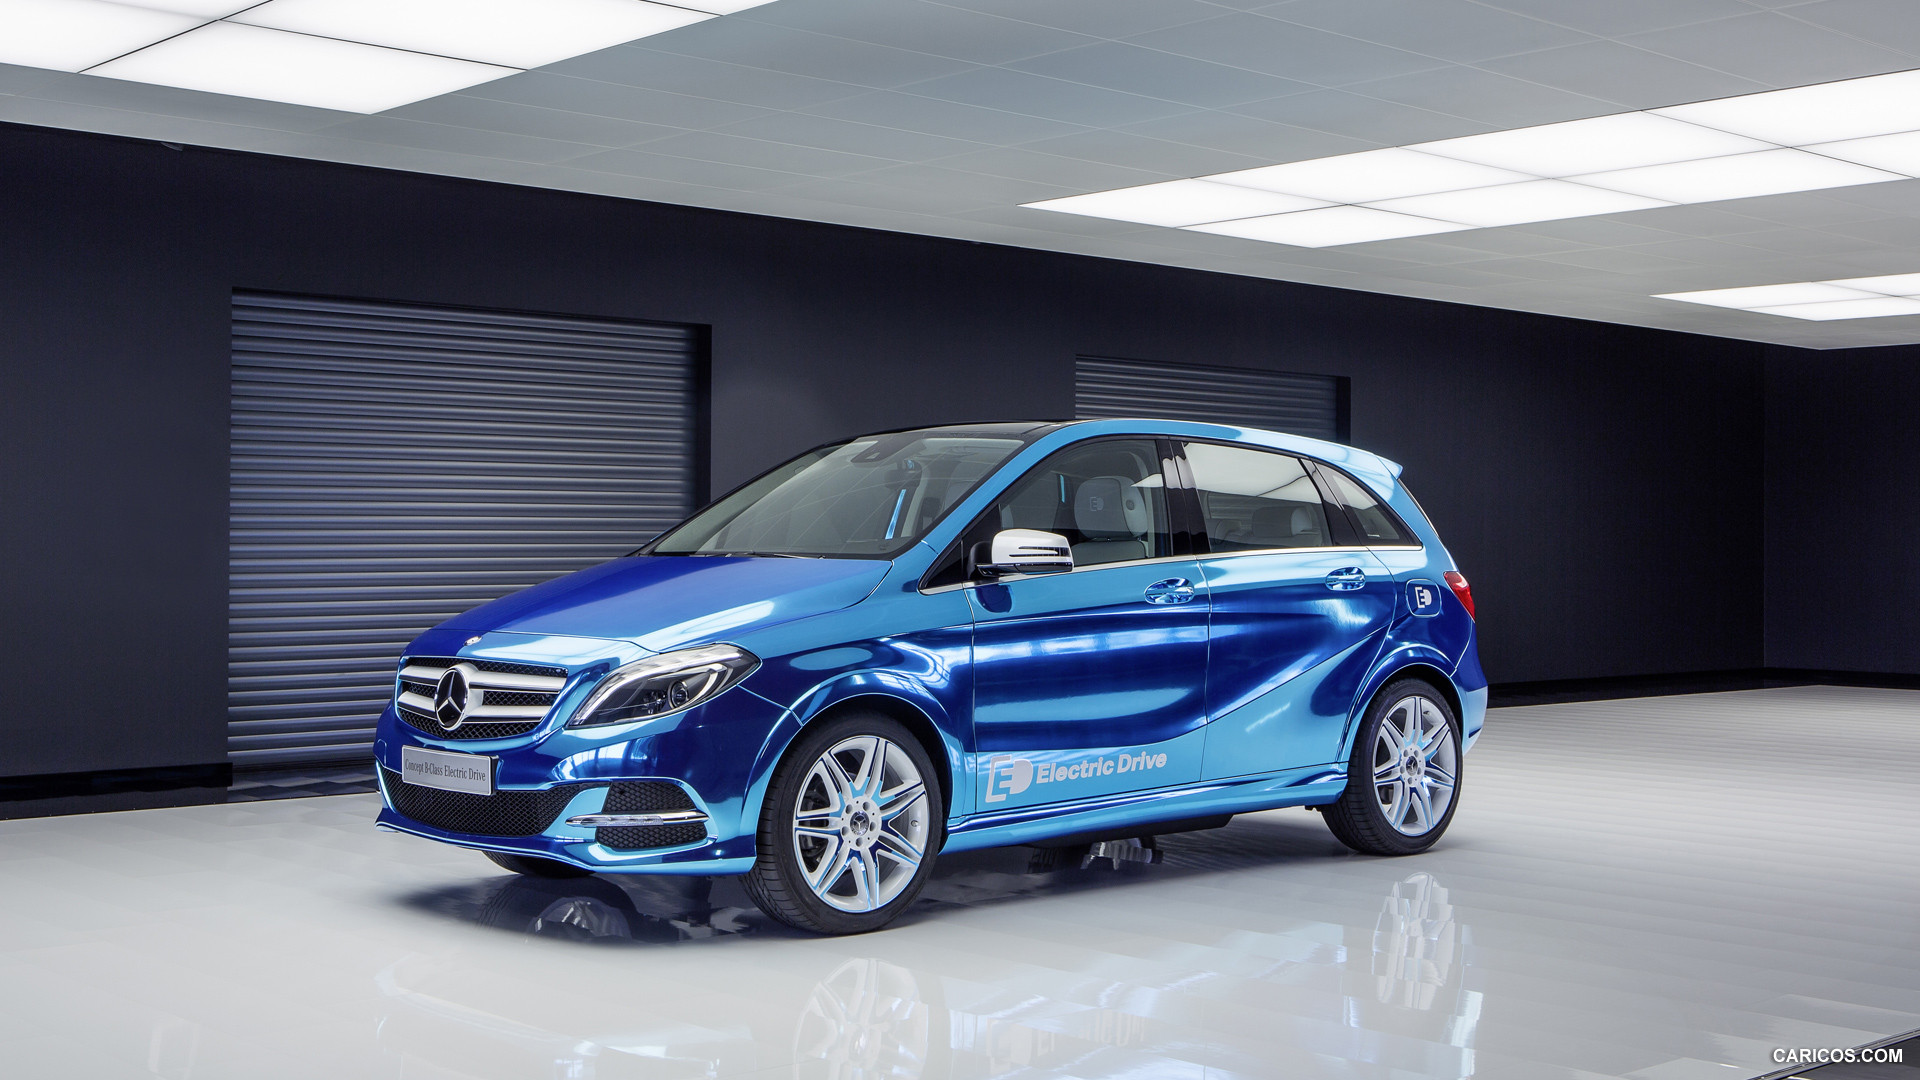 2012 Mercedes-Benz B-Class Electric Drive Concept  - Front, #13 of 18